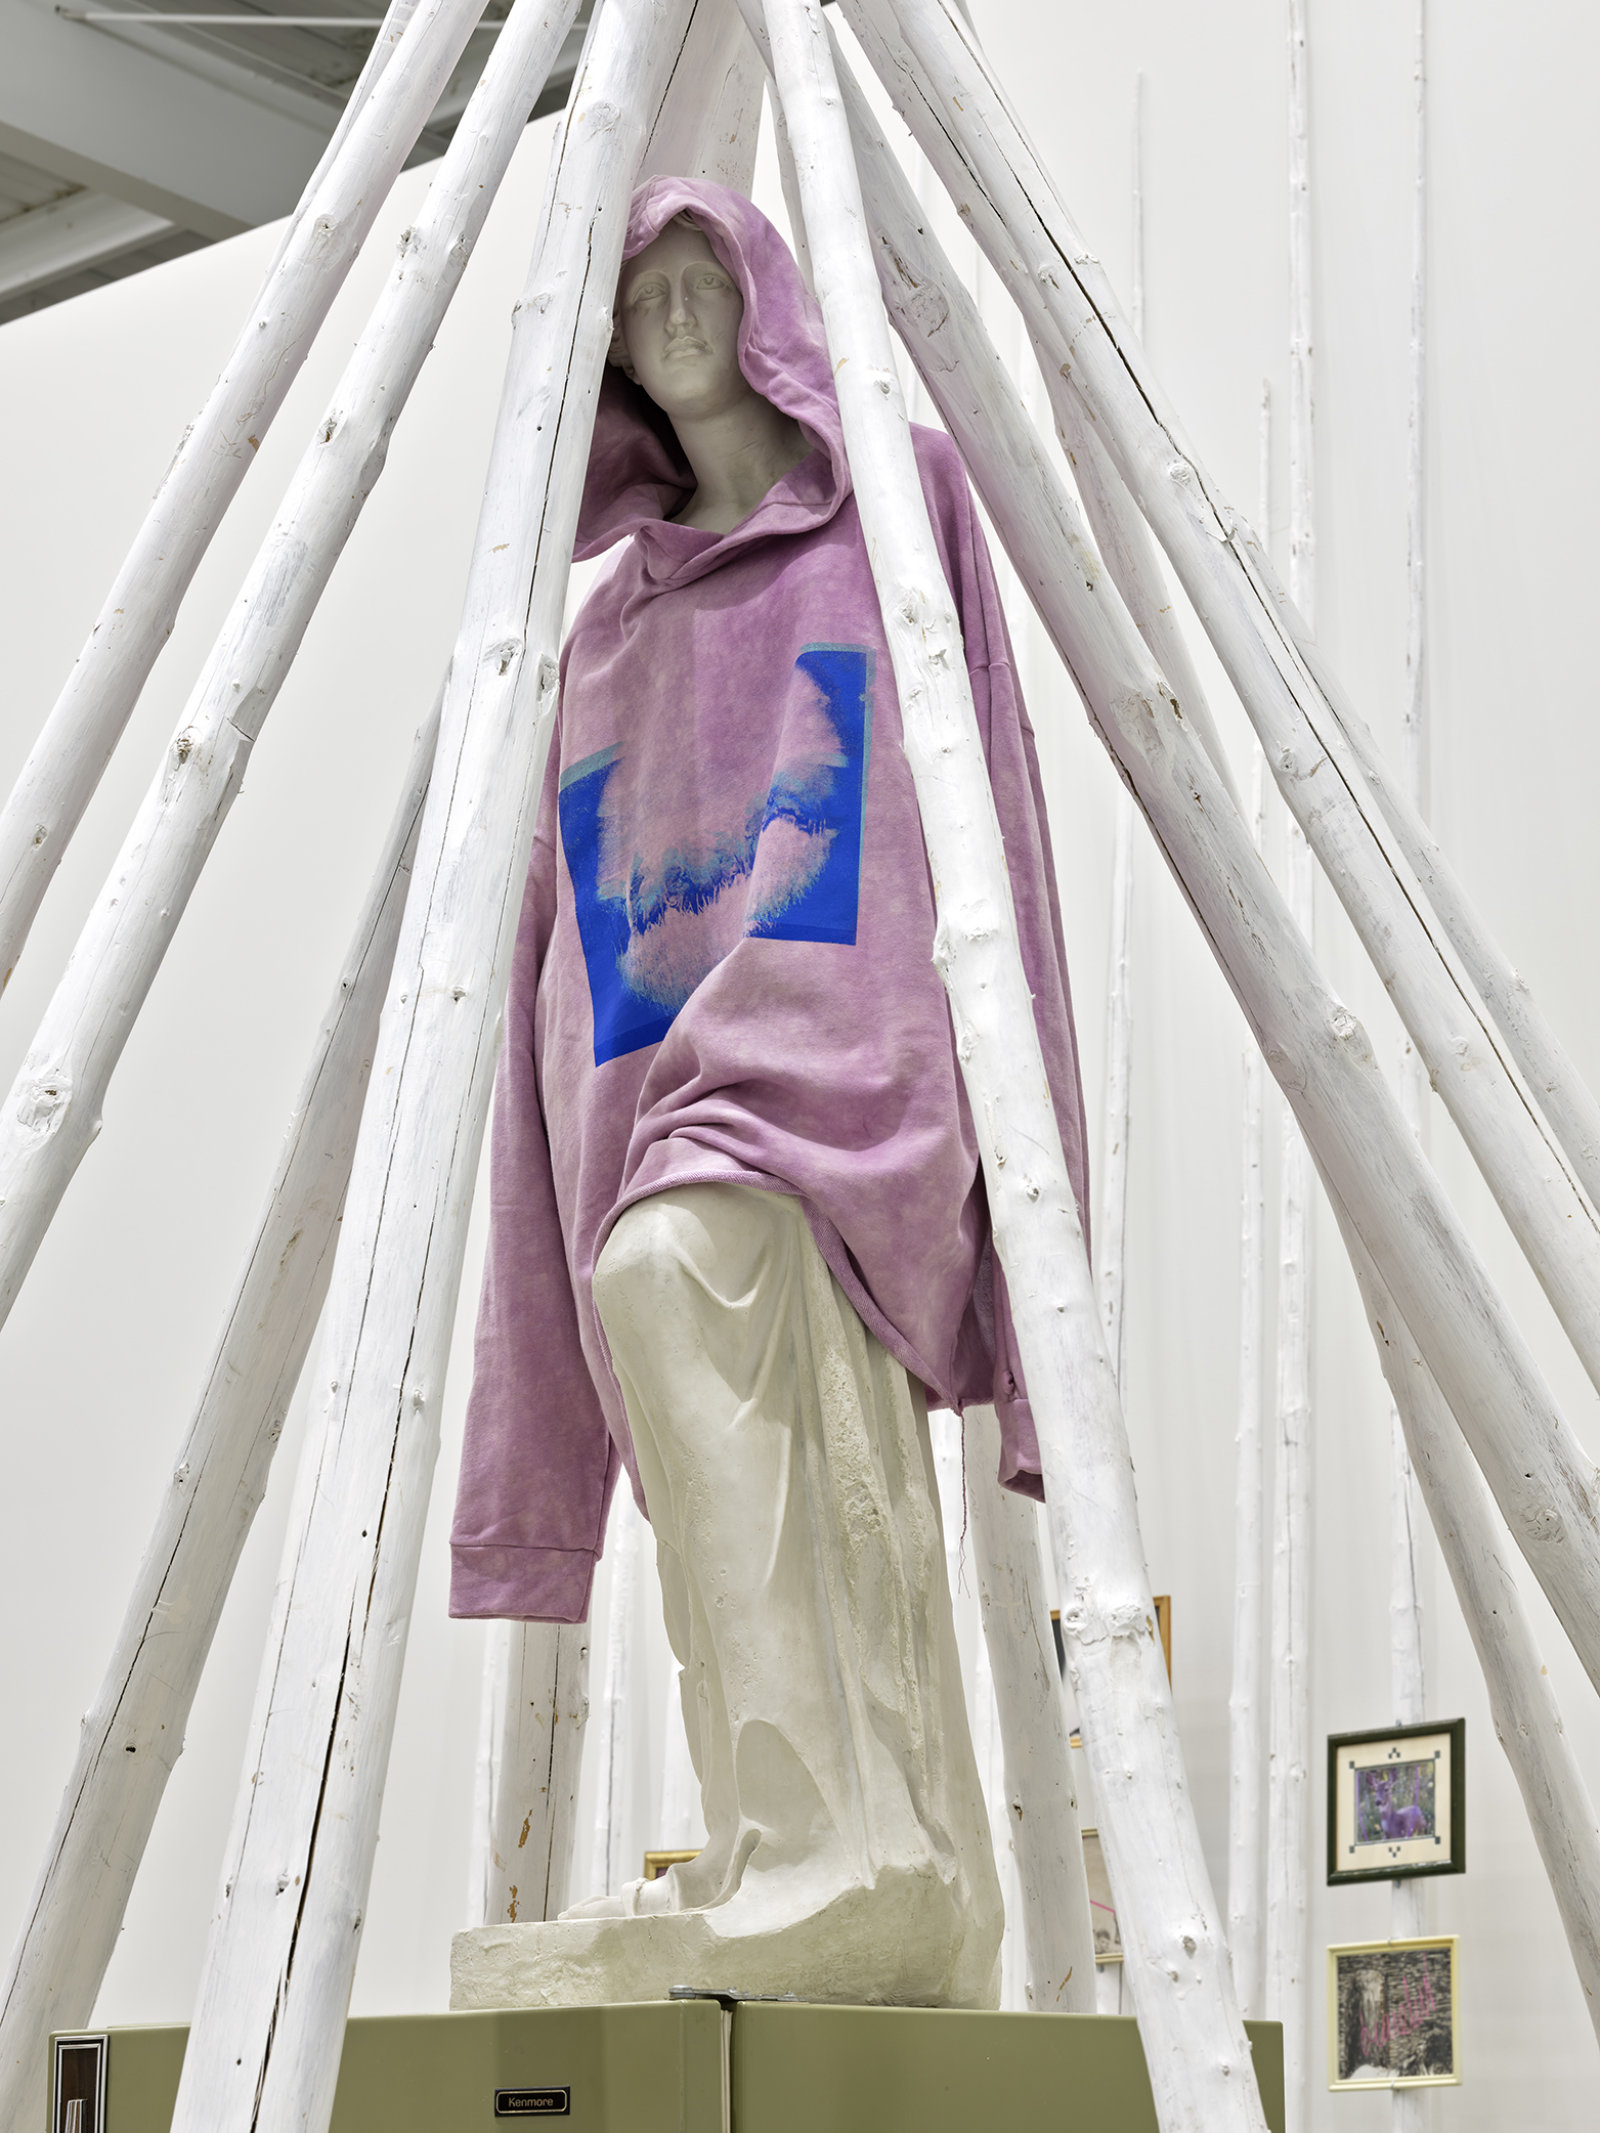 Duane Linklater, what grief conjures (detail), 2020, tipi poles, paint, nylon rope, wooden pallet, refrigerator, tie-down straps, hand truck, plastic statue, handmade hoodie, cochineal dye, silkscreen, 249 x 160 x 160 in. (632 x 406 x 406 cm)